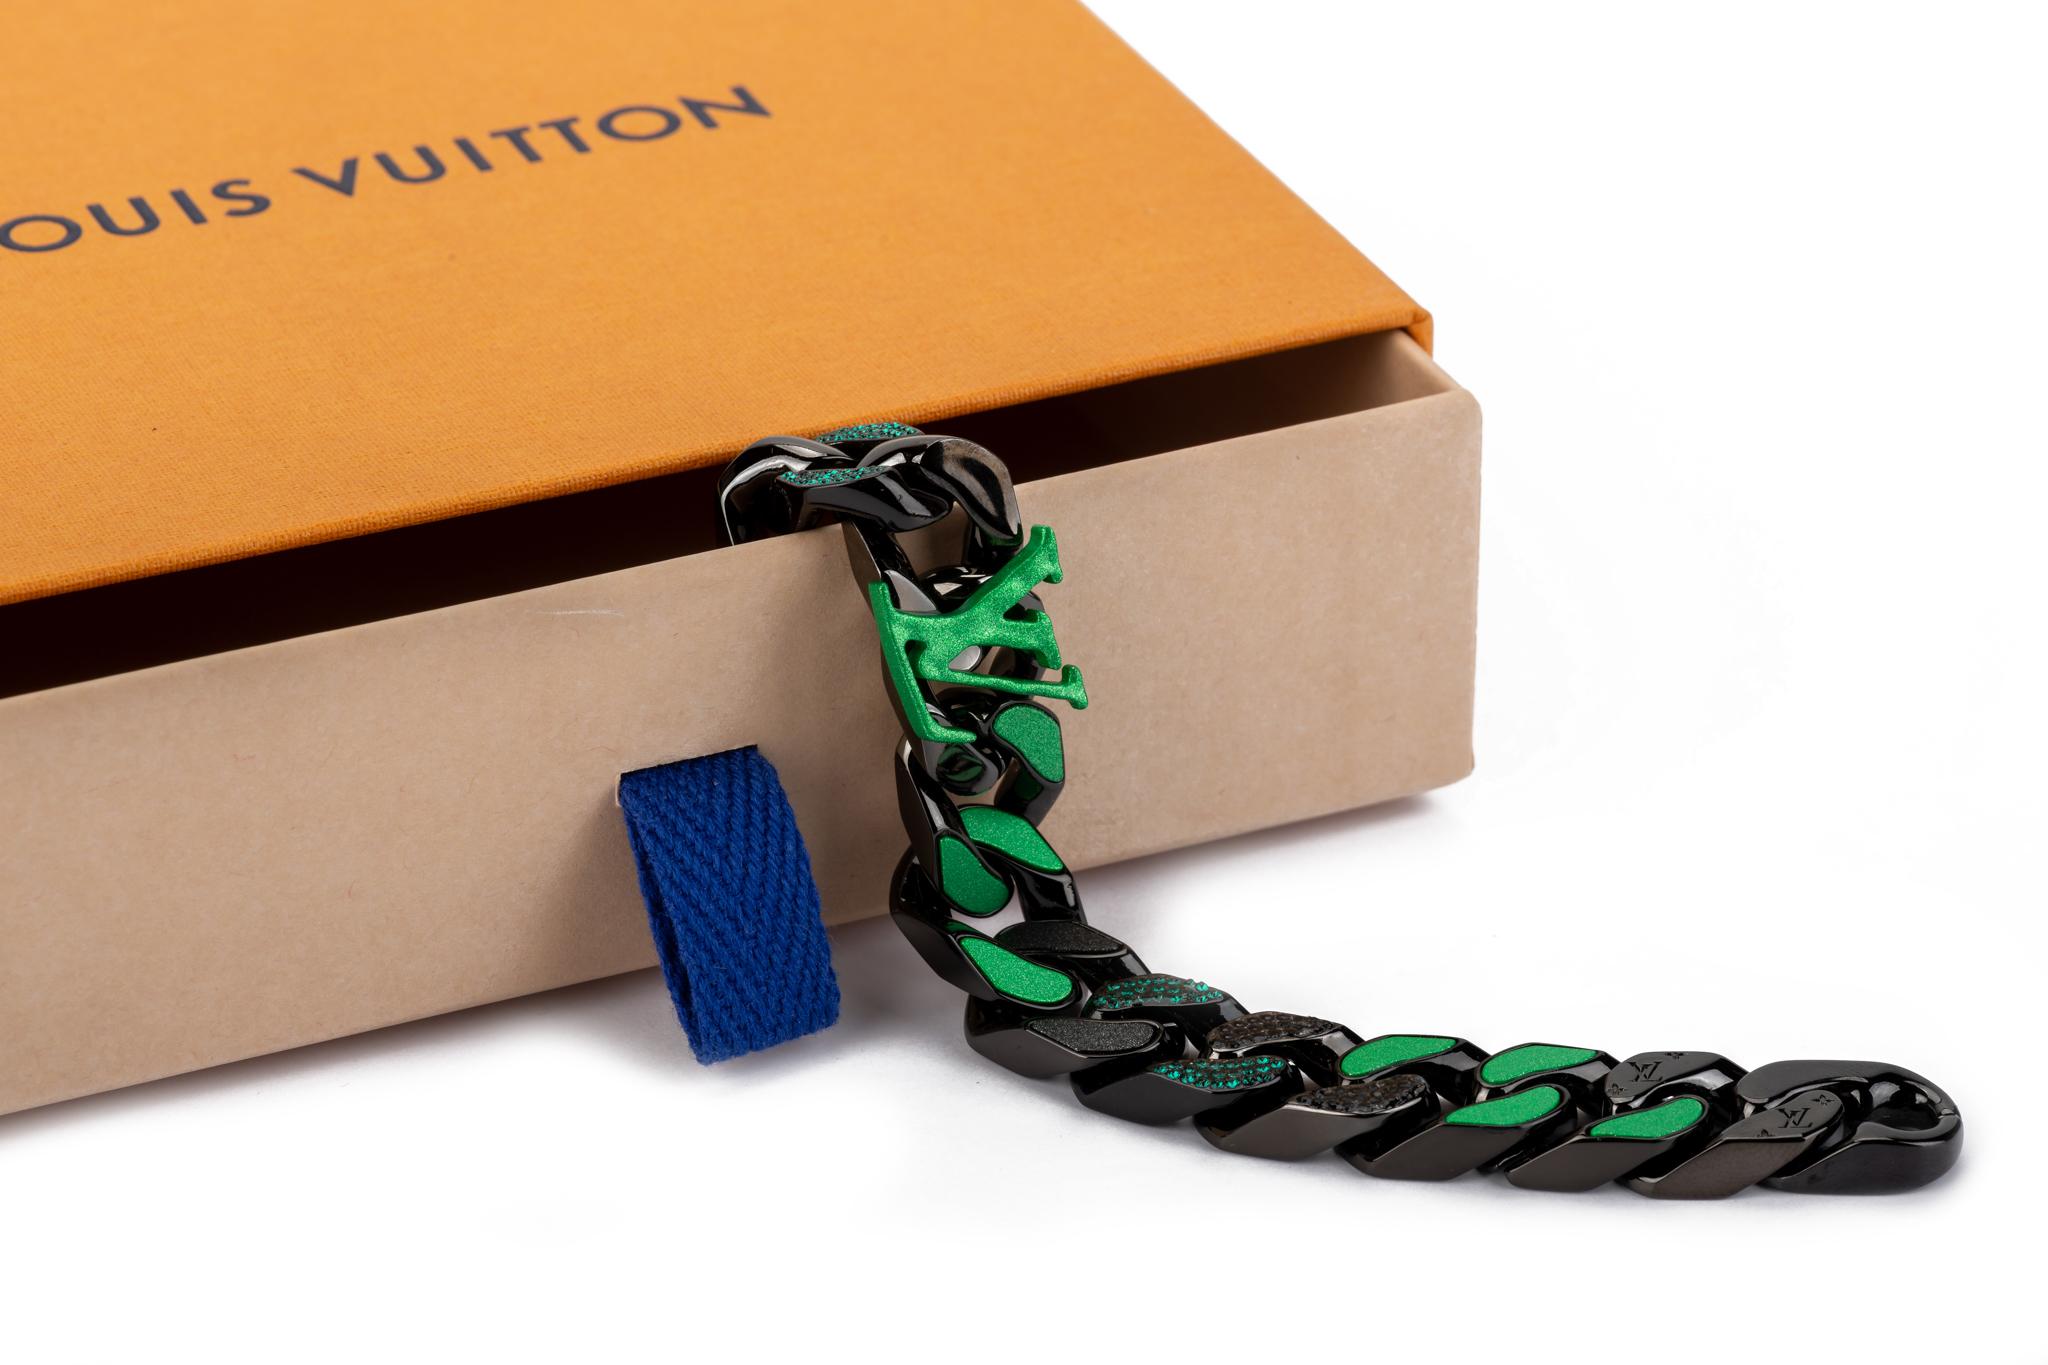 Louis Vuitton brand new link bracelet designed by Virgil Abloh. Highly collectible and sold out. 2020 collection. Gunmetal logo embossed chain with green and black rhinestones anad enamel LV logo . Comes with protective plastic, velvet pouch and